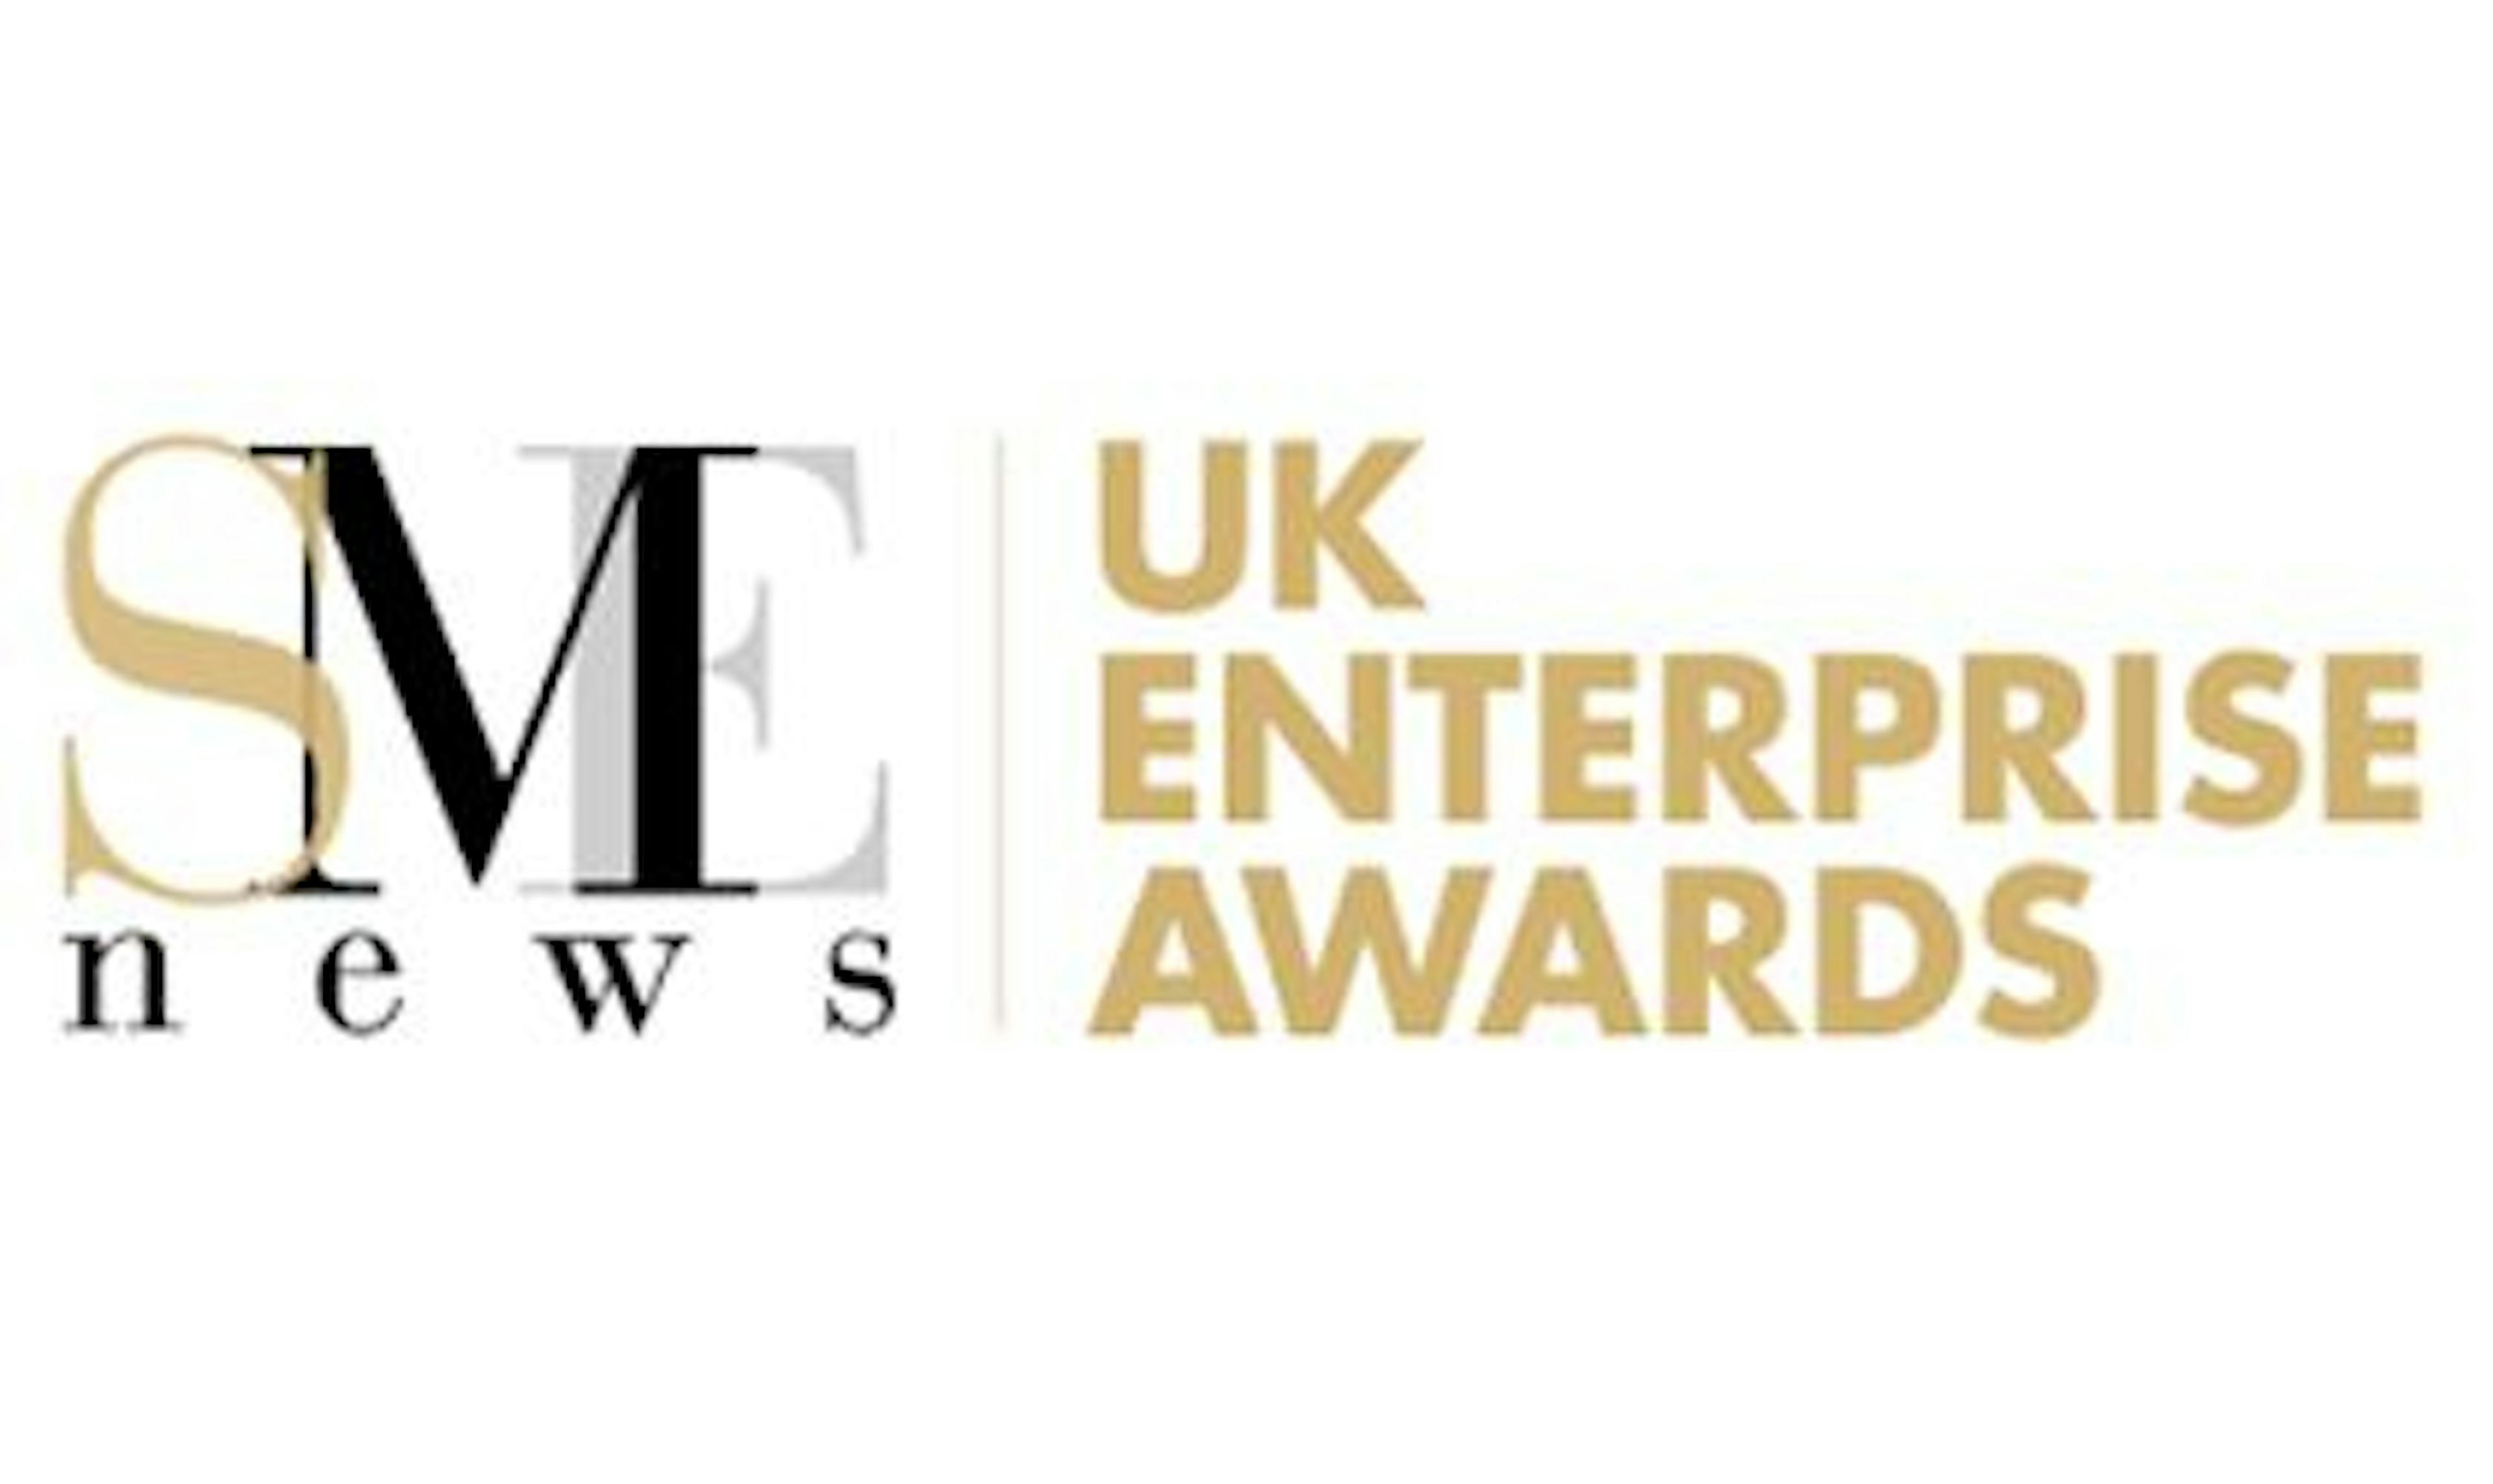 Forbes is Delighted to Receive Two UK Enterprise Awards